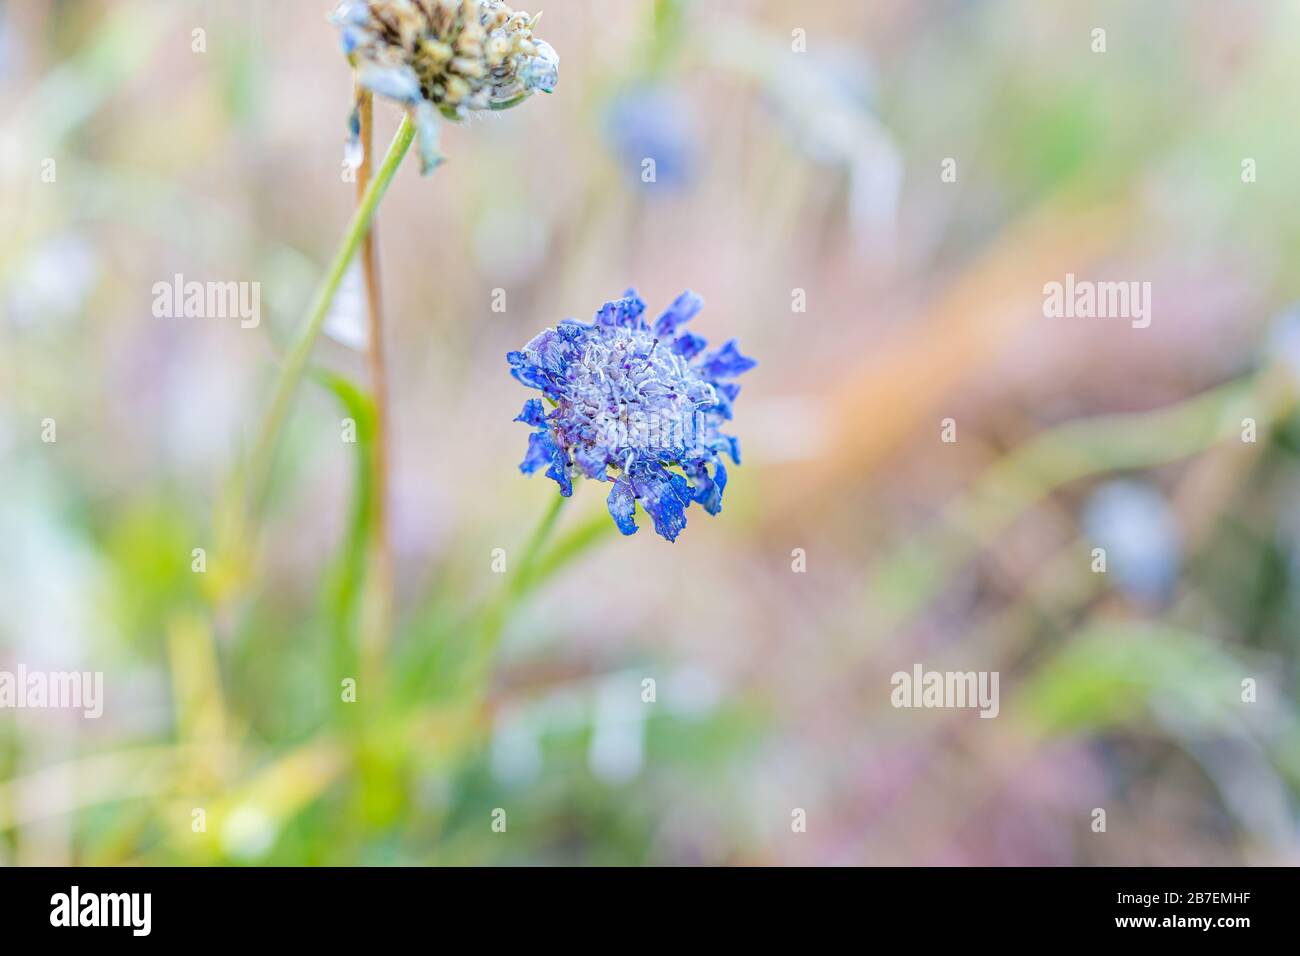 Macro closeup of frozen Scabiosa columbaria butterfly blue pincushion flower in Colorado garden with blurry background showing texture of petals Stock Photo